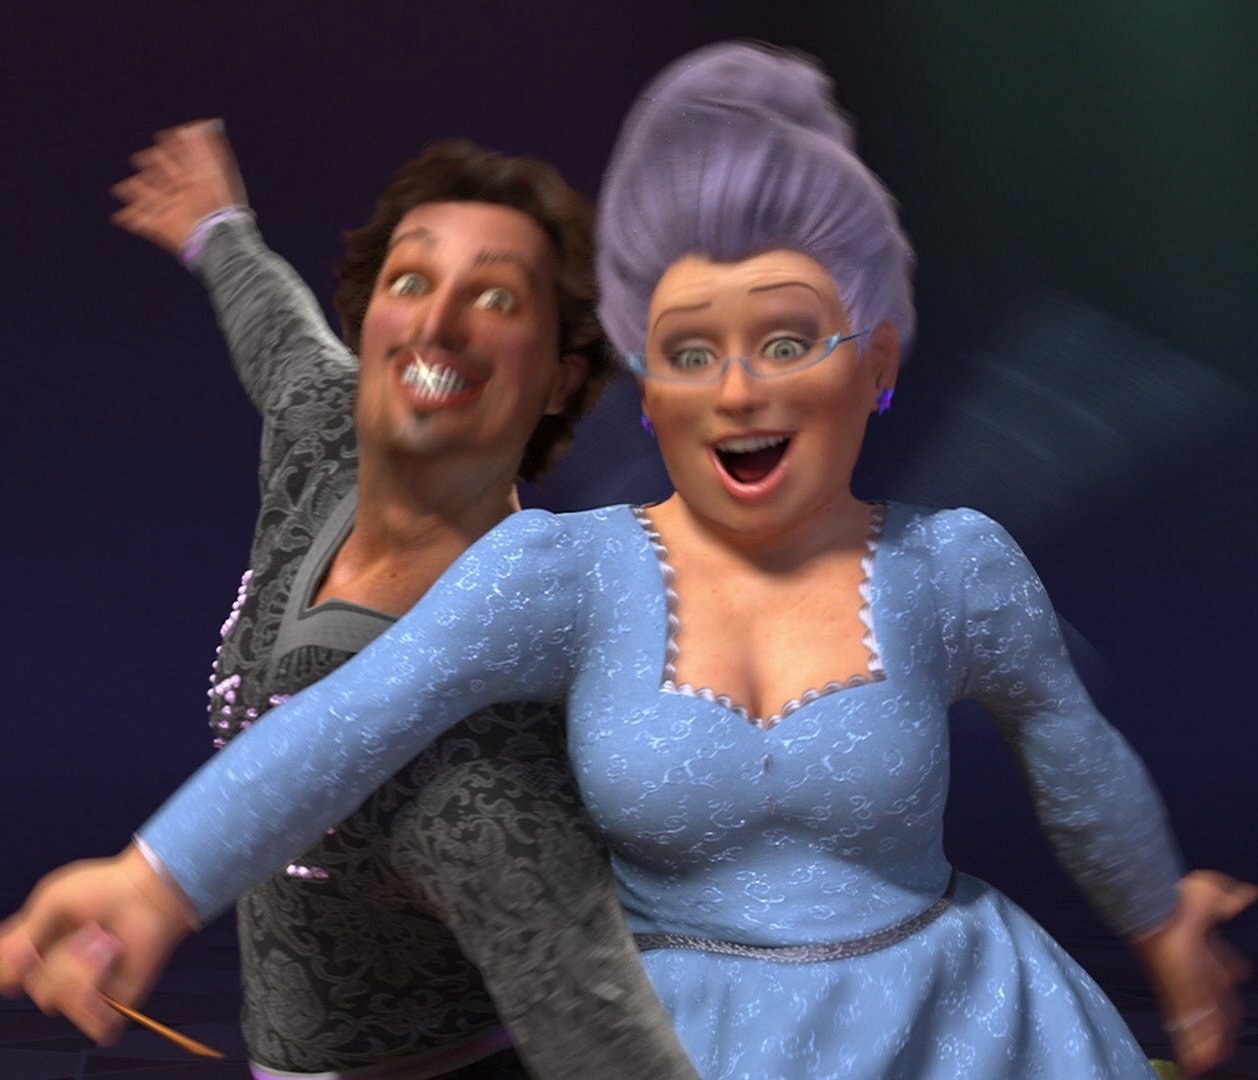 988. The official baddie of the hour is Fairy Godmother from Shrek 2. 